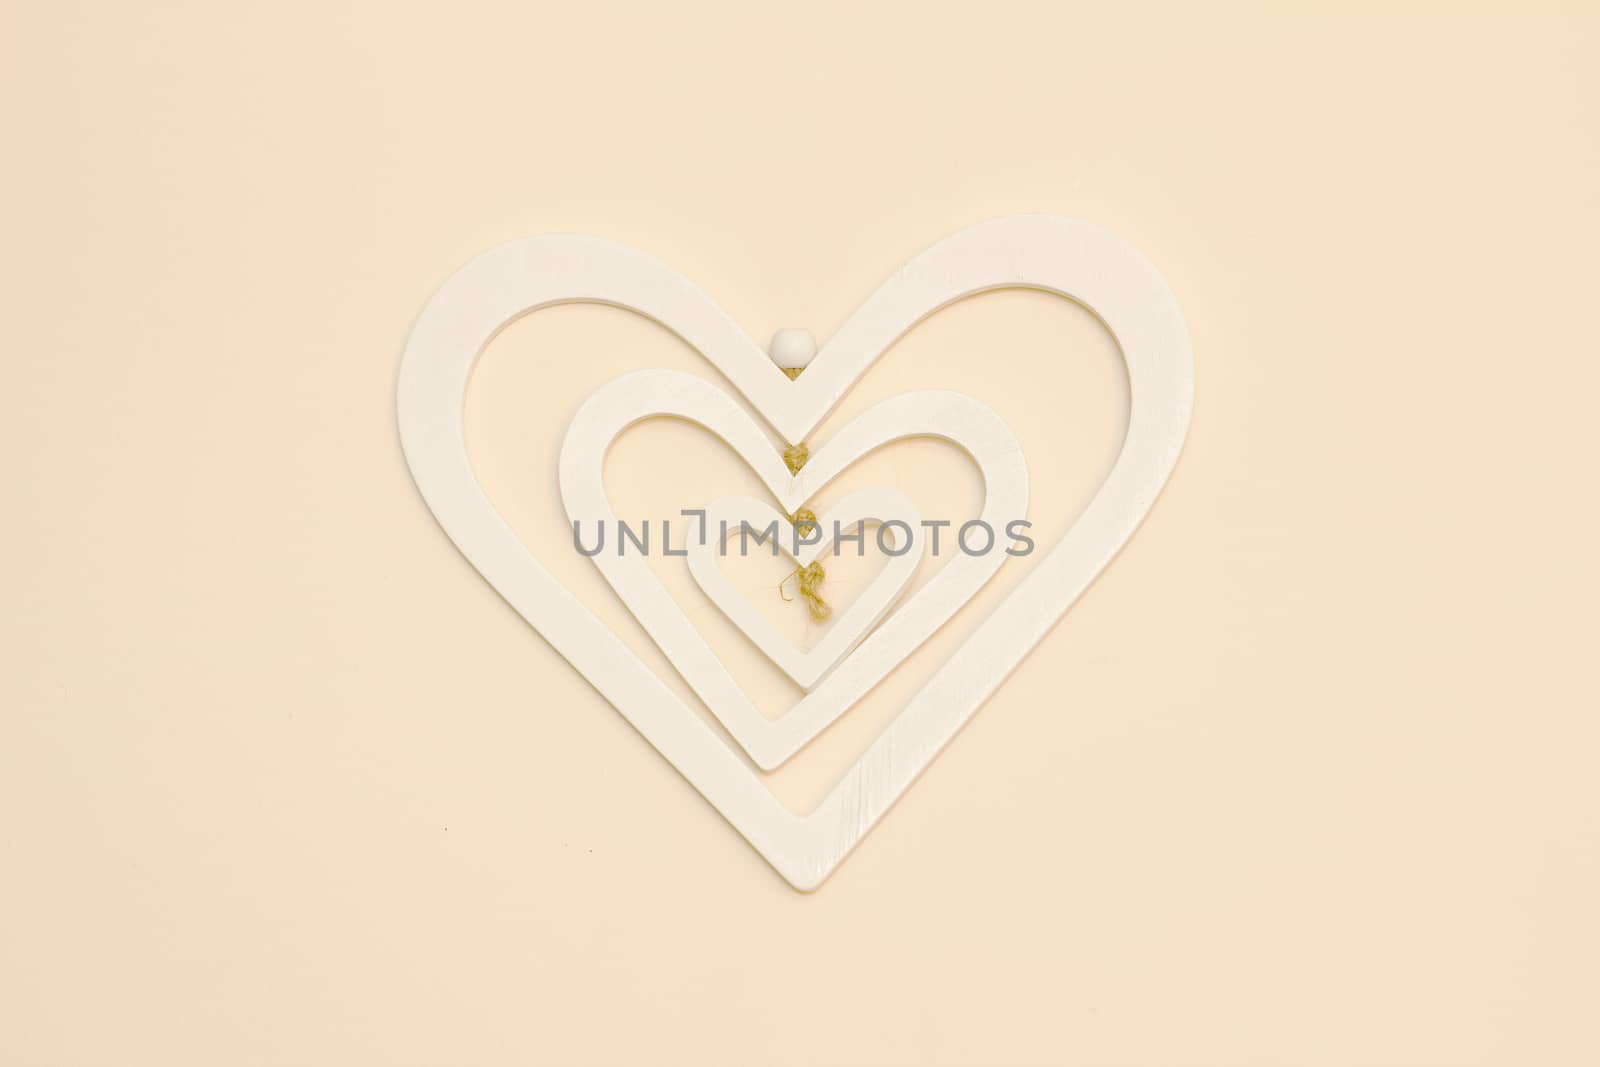 A three layer white heart made of wood hanging on a cream wall centered in the photo